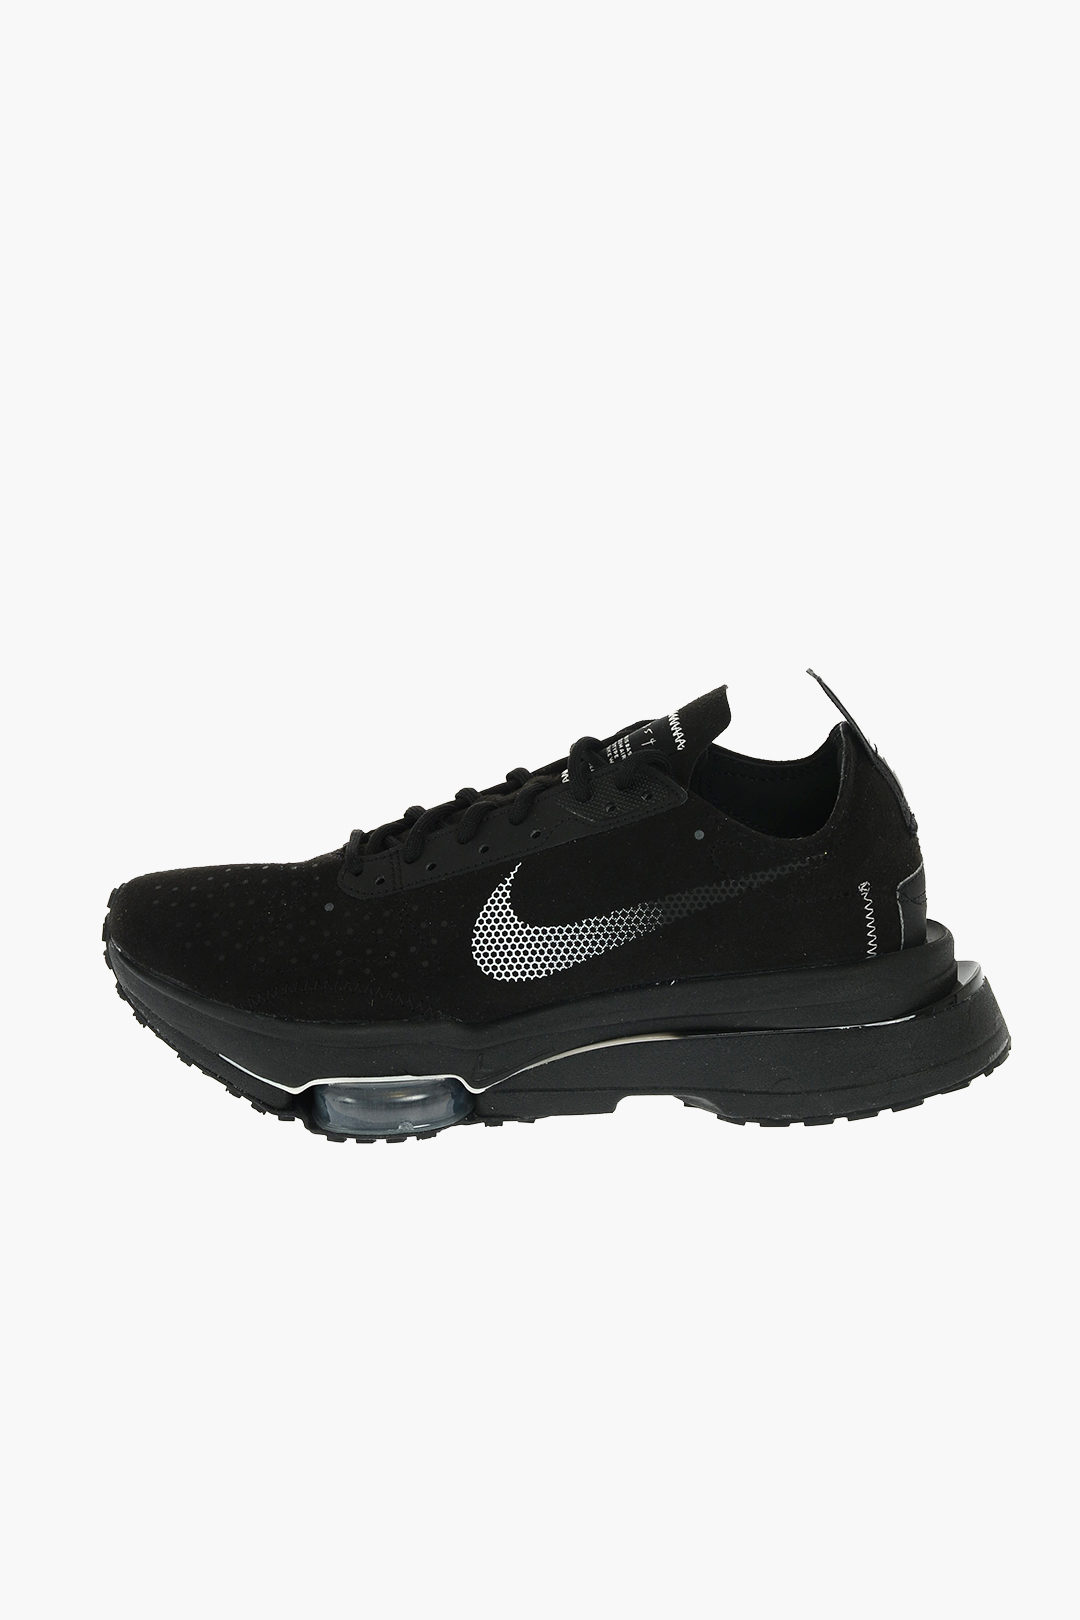 nike zoom with air bubble